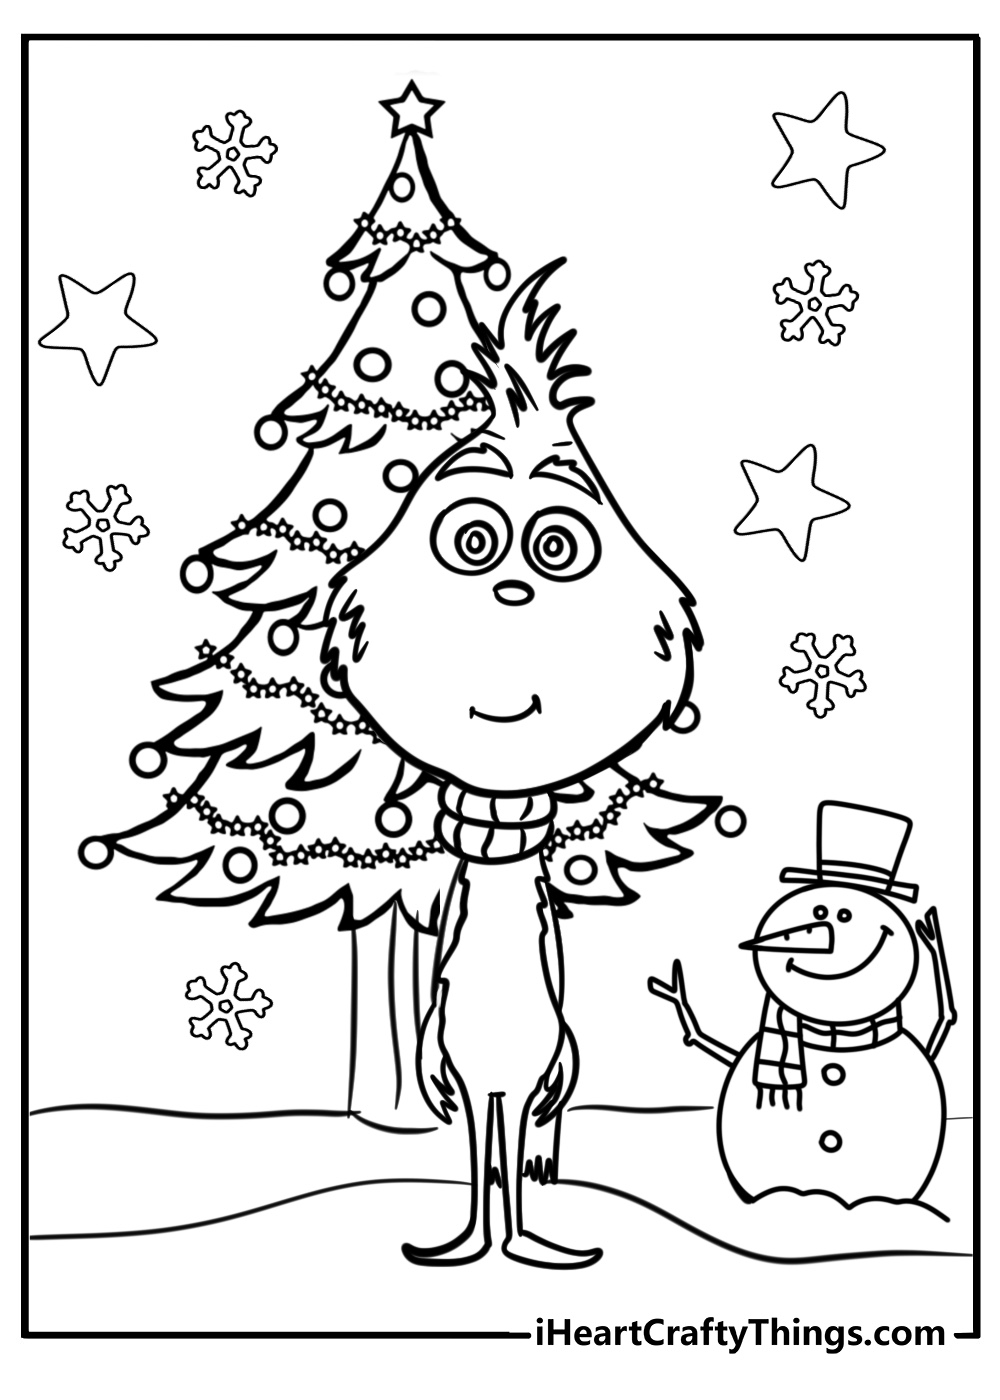 Grinch coloring pages for christmas